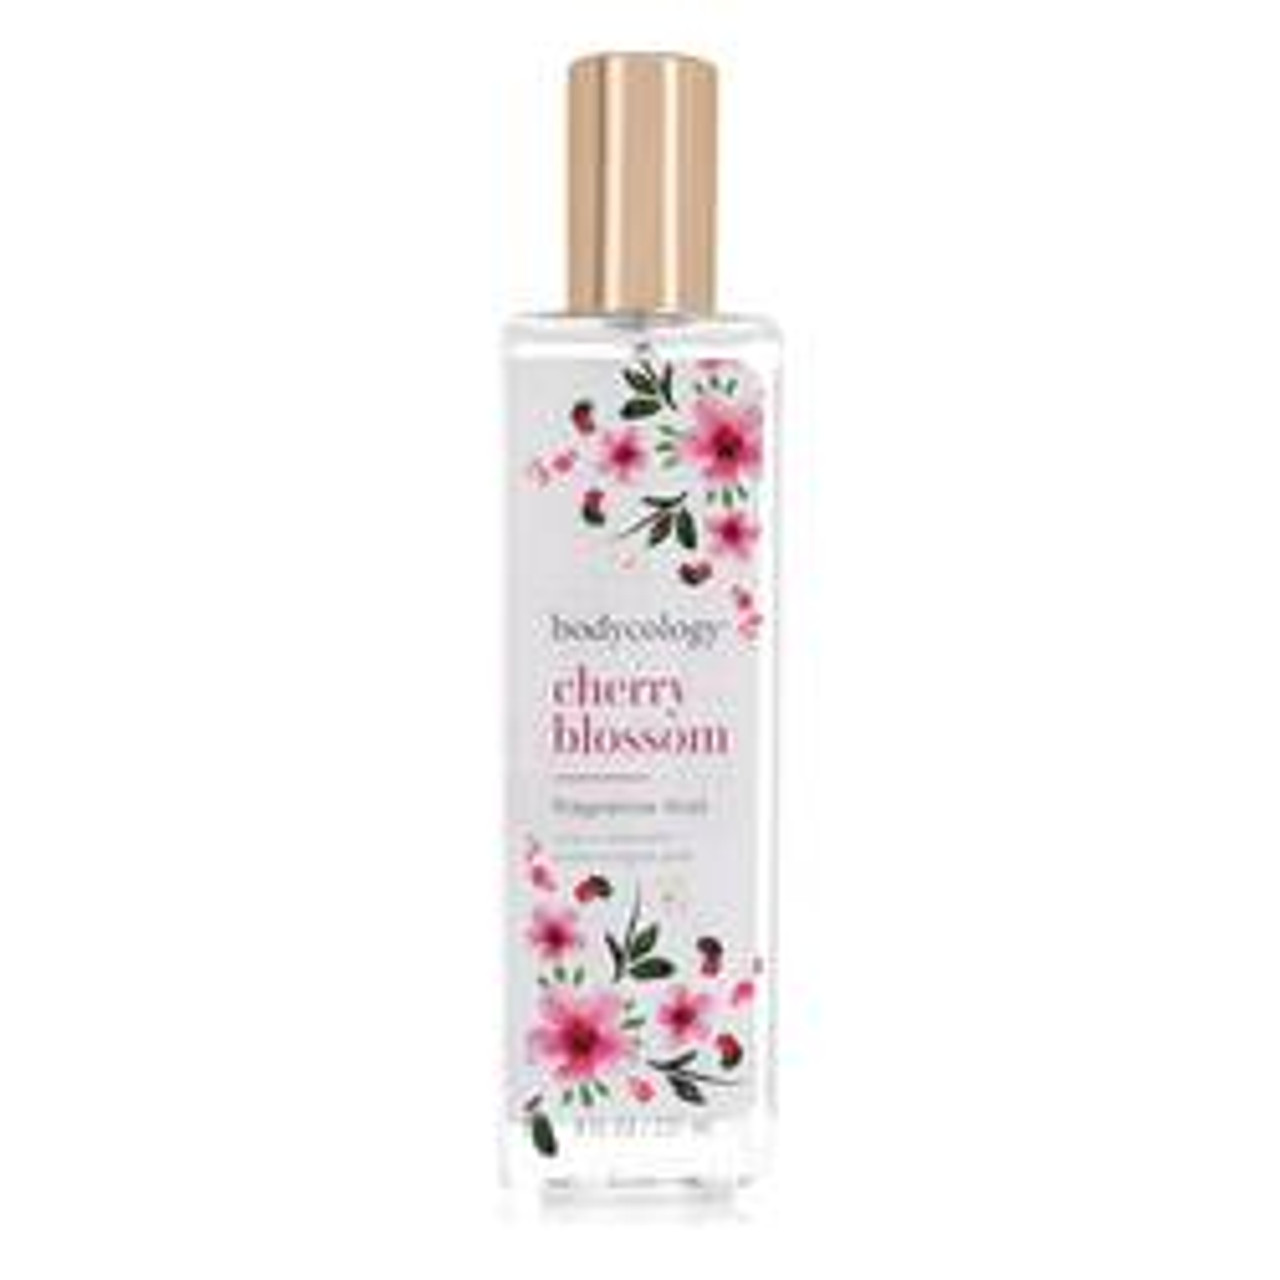 Bodycology Cherry Blossom Cedarwood And Pear Perfume By Bodycology Fragrance Mist Spray 8 oz for Women - [From 23.00 - Choose pk Qty ] - *Ships from Miami